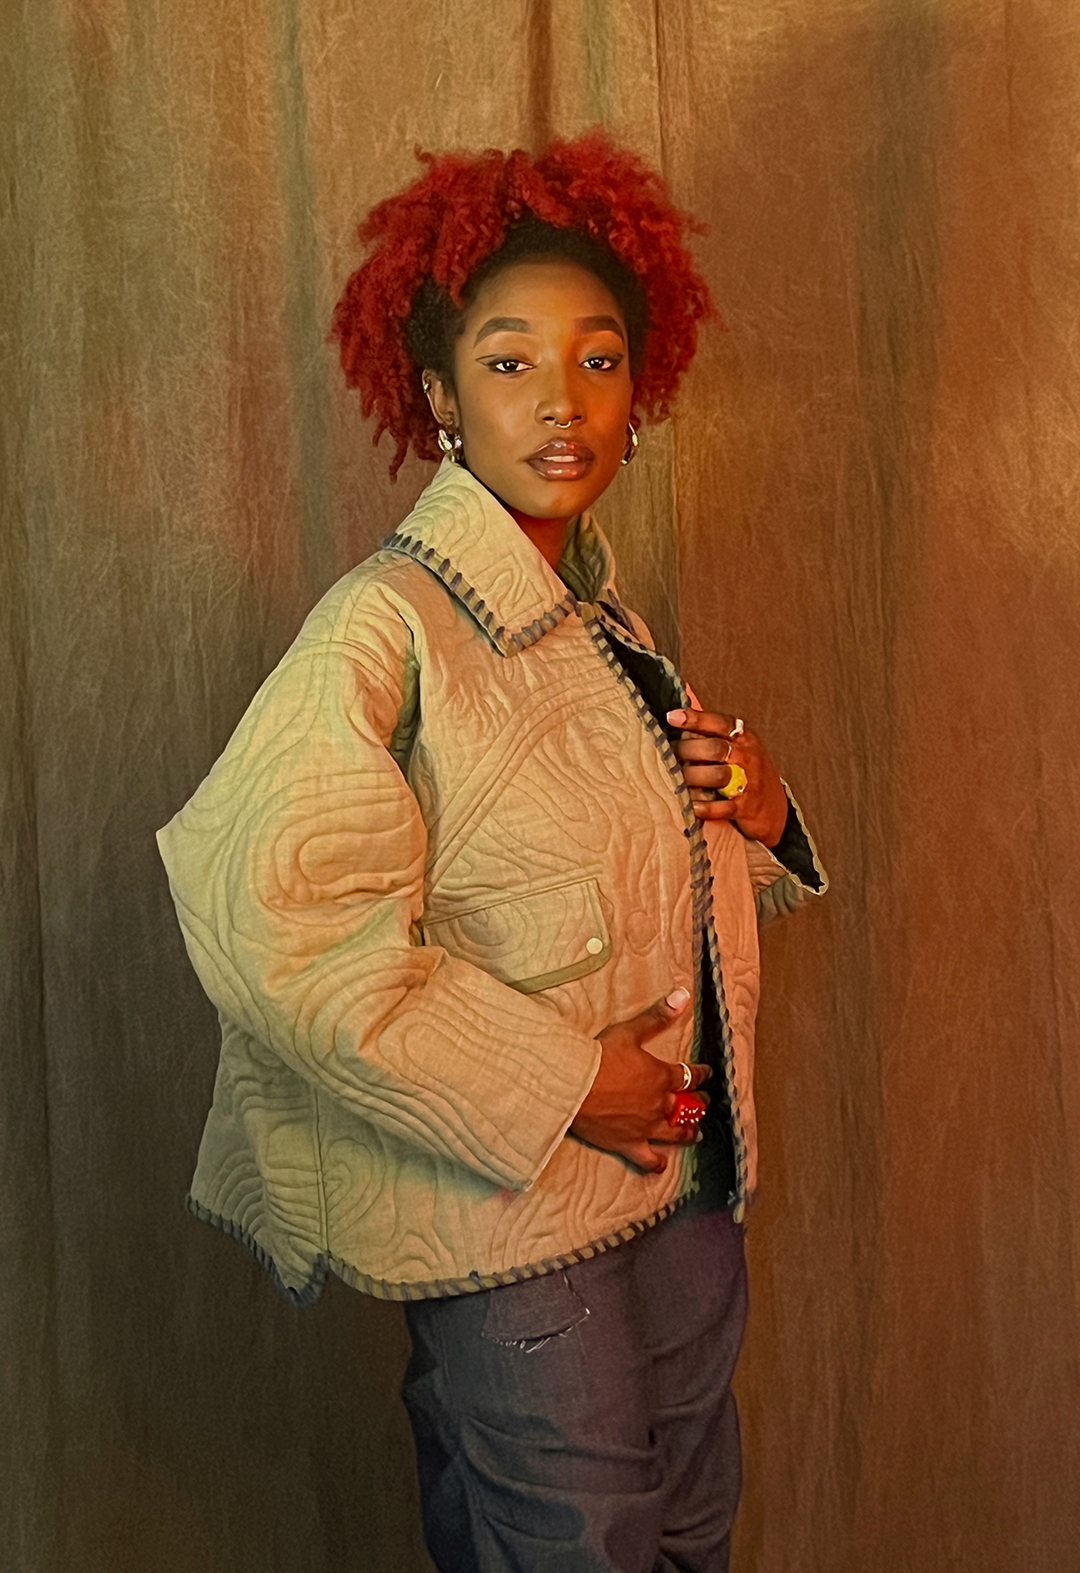 A model is standing with one hand on the jacket, which has a quilted pattern that depicts different imagery.